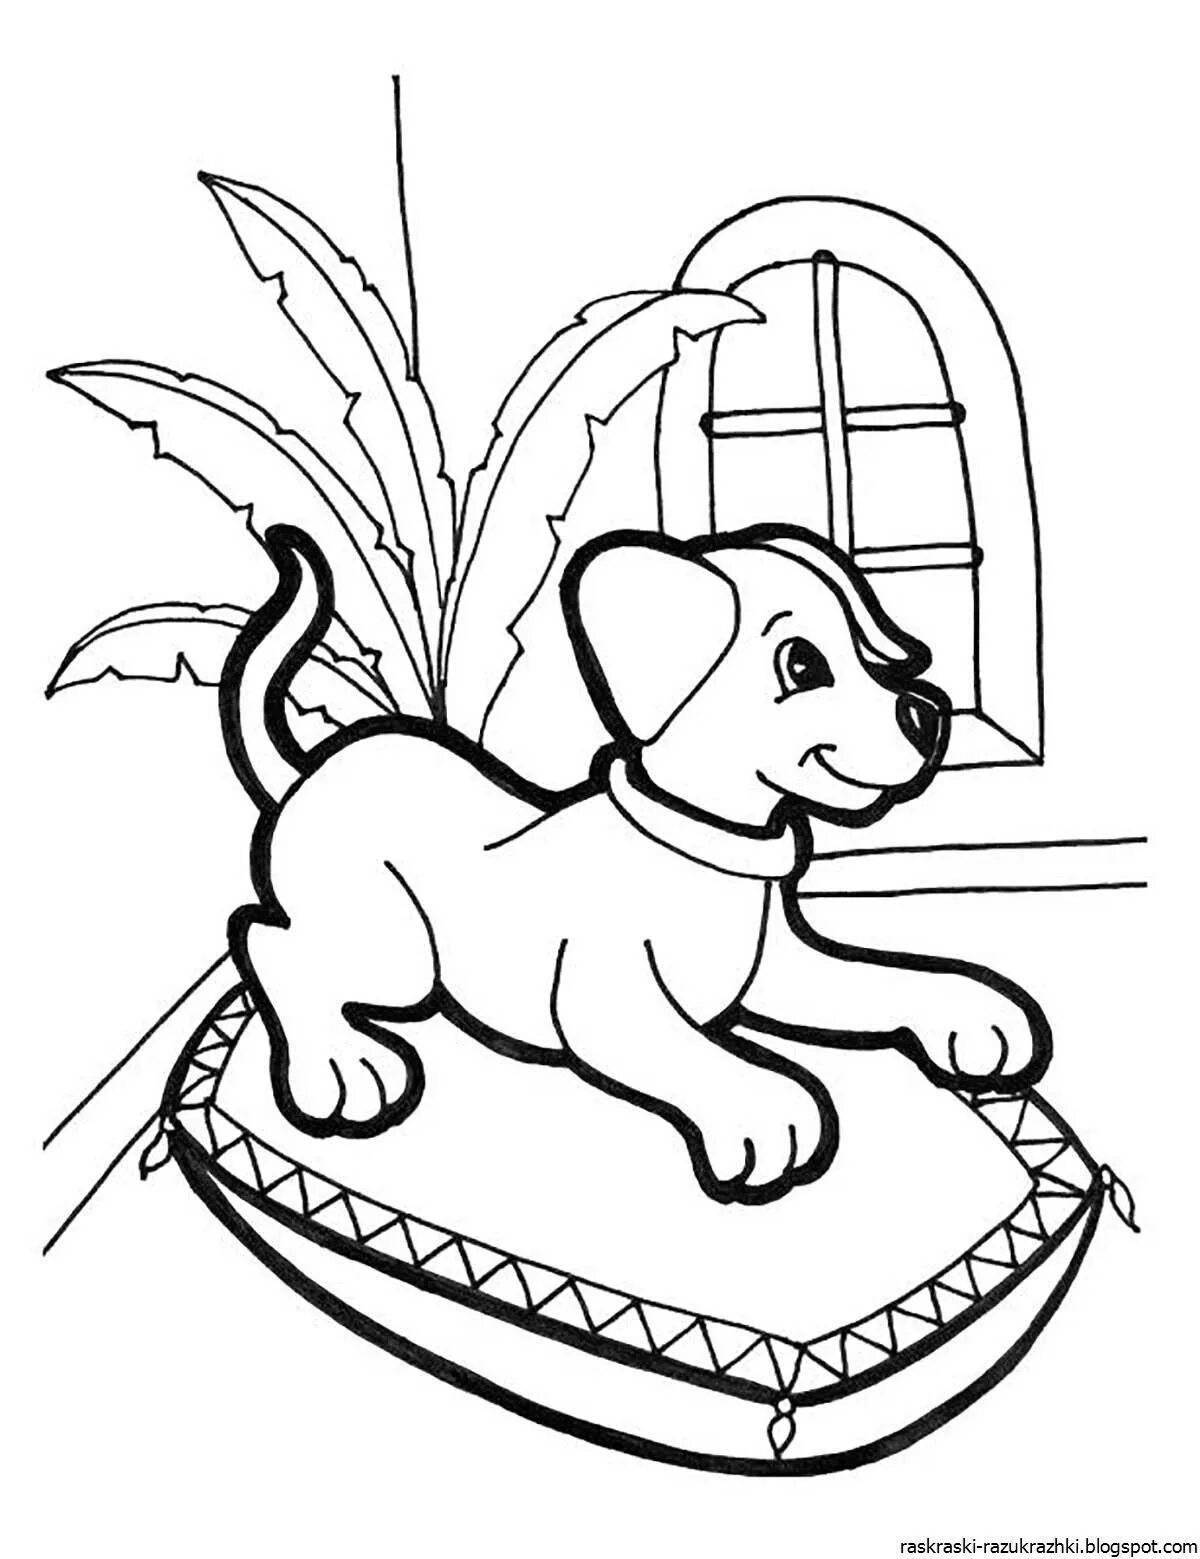 Animated dog and cat coloring pages for kids